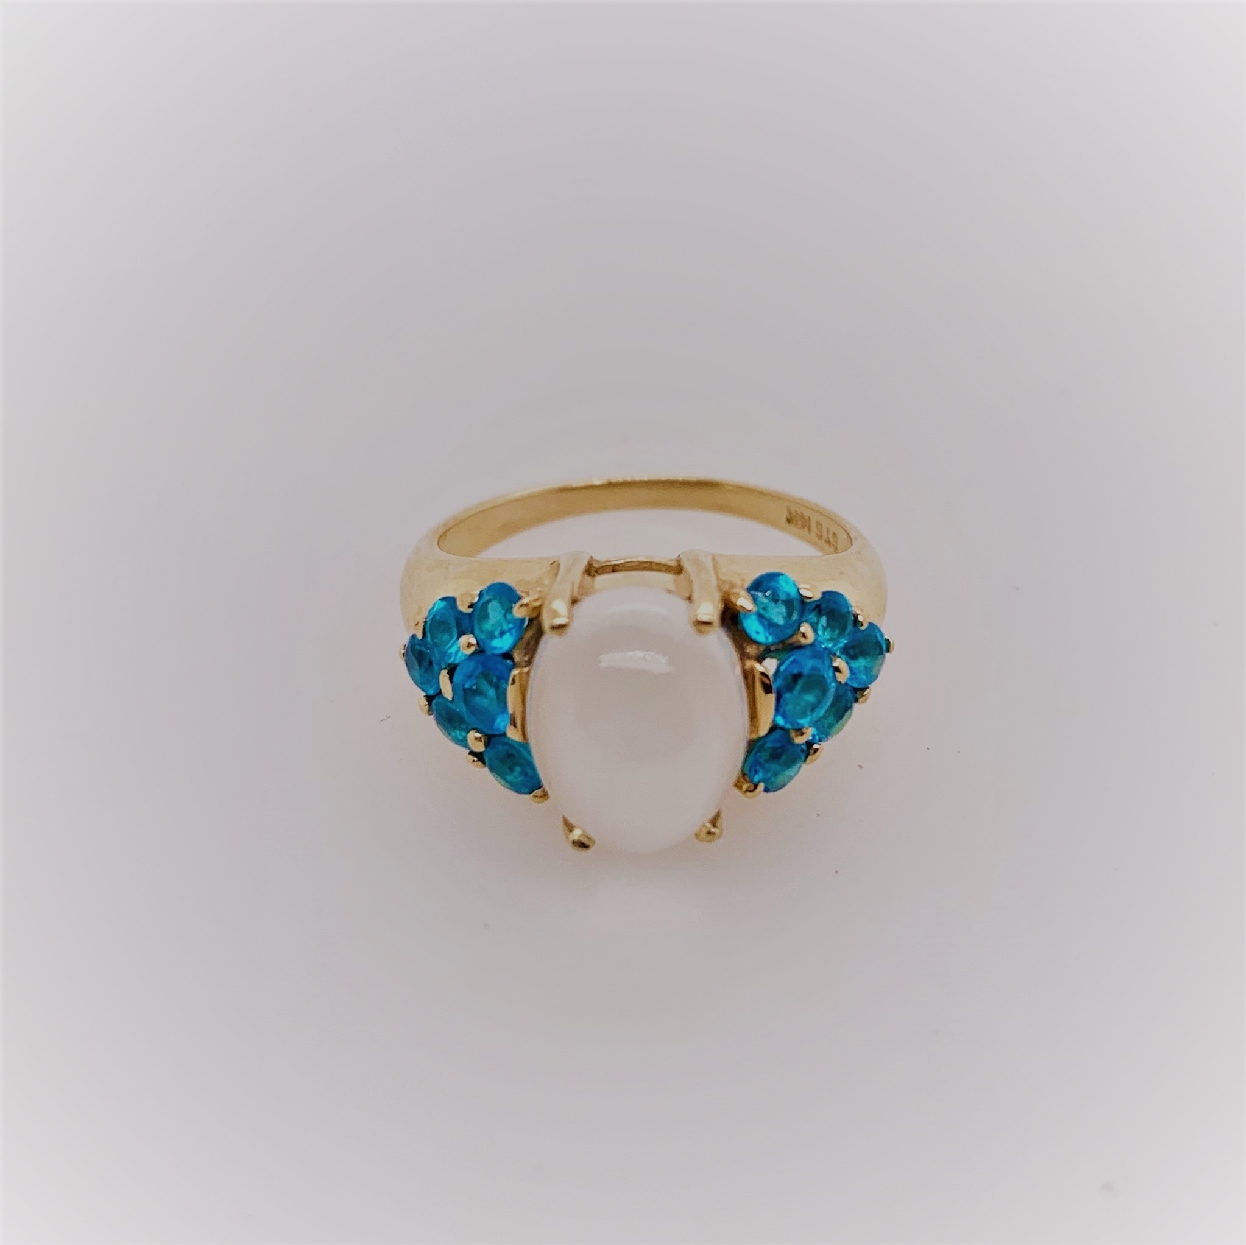 14K Yellow Gold Cabachon Cut Moonstone Ring with Blue Apatite Accents; Size 6.25